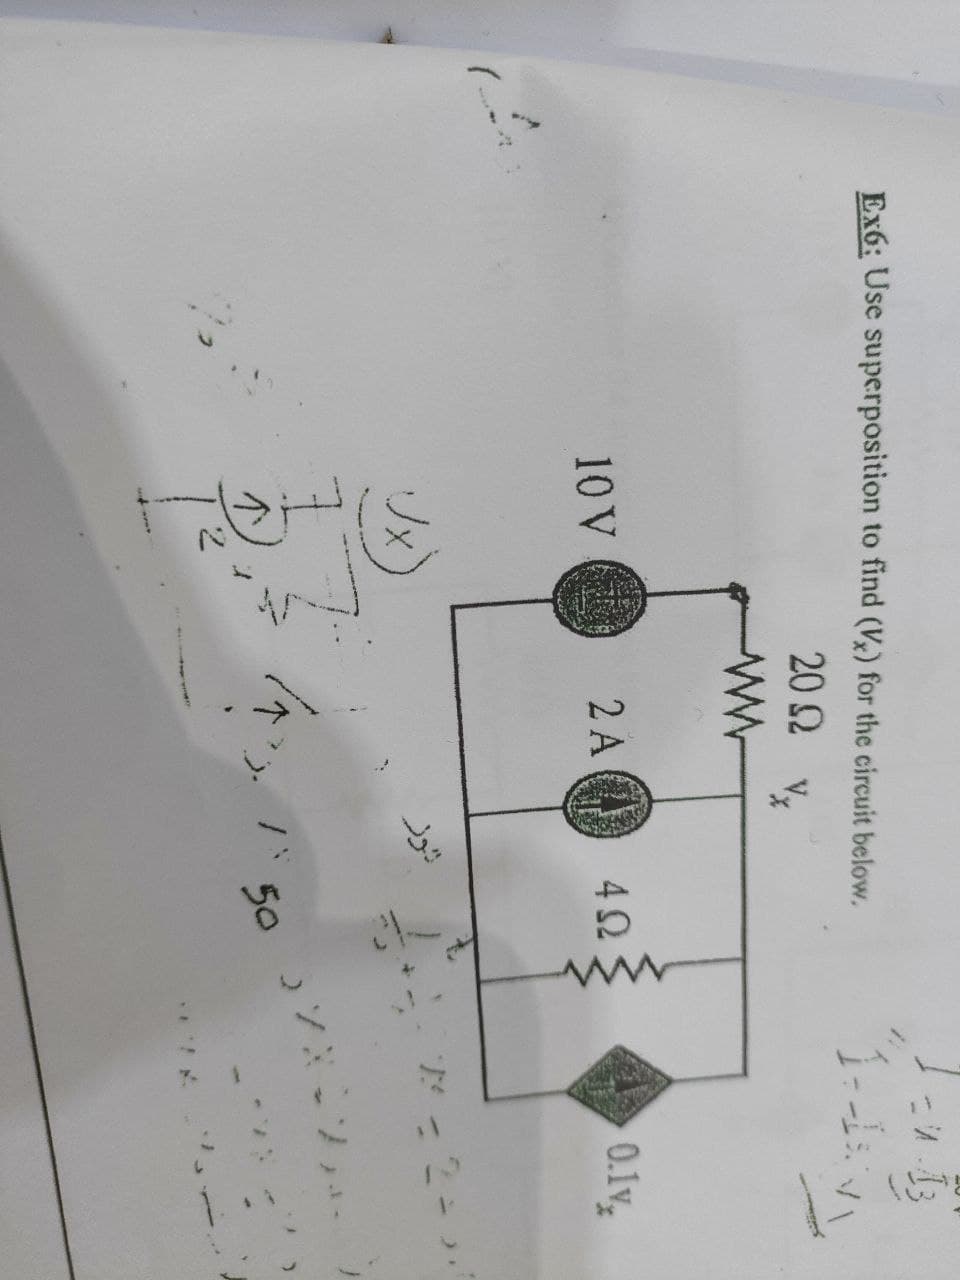 Ex6: Use superposition to find (Vx) for the circuit below.
202
10 V
2 A
0.1v
50
5o ソ ソハー
